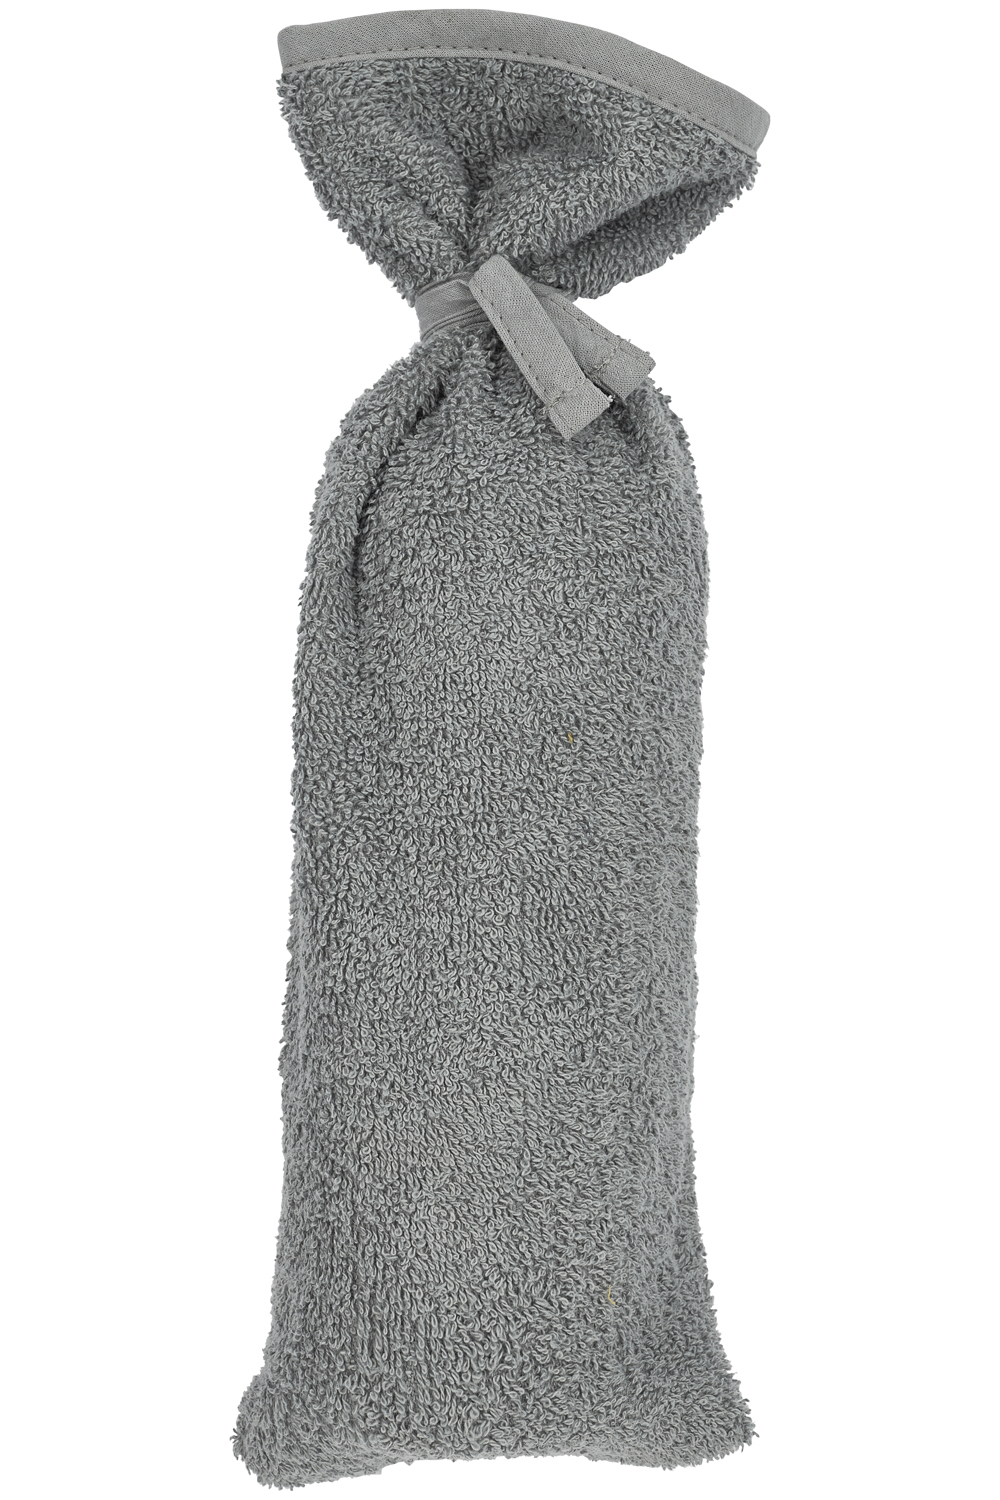 Hot Water Bottle Cover Basic Terry - Grey - 13xh35cm